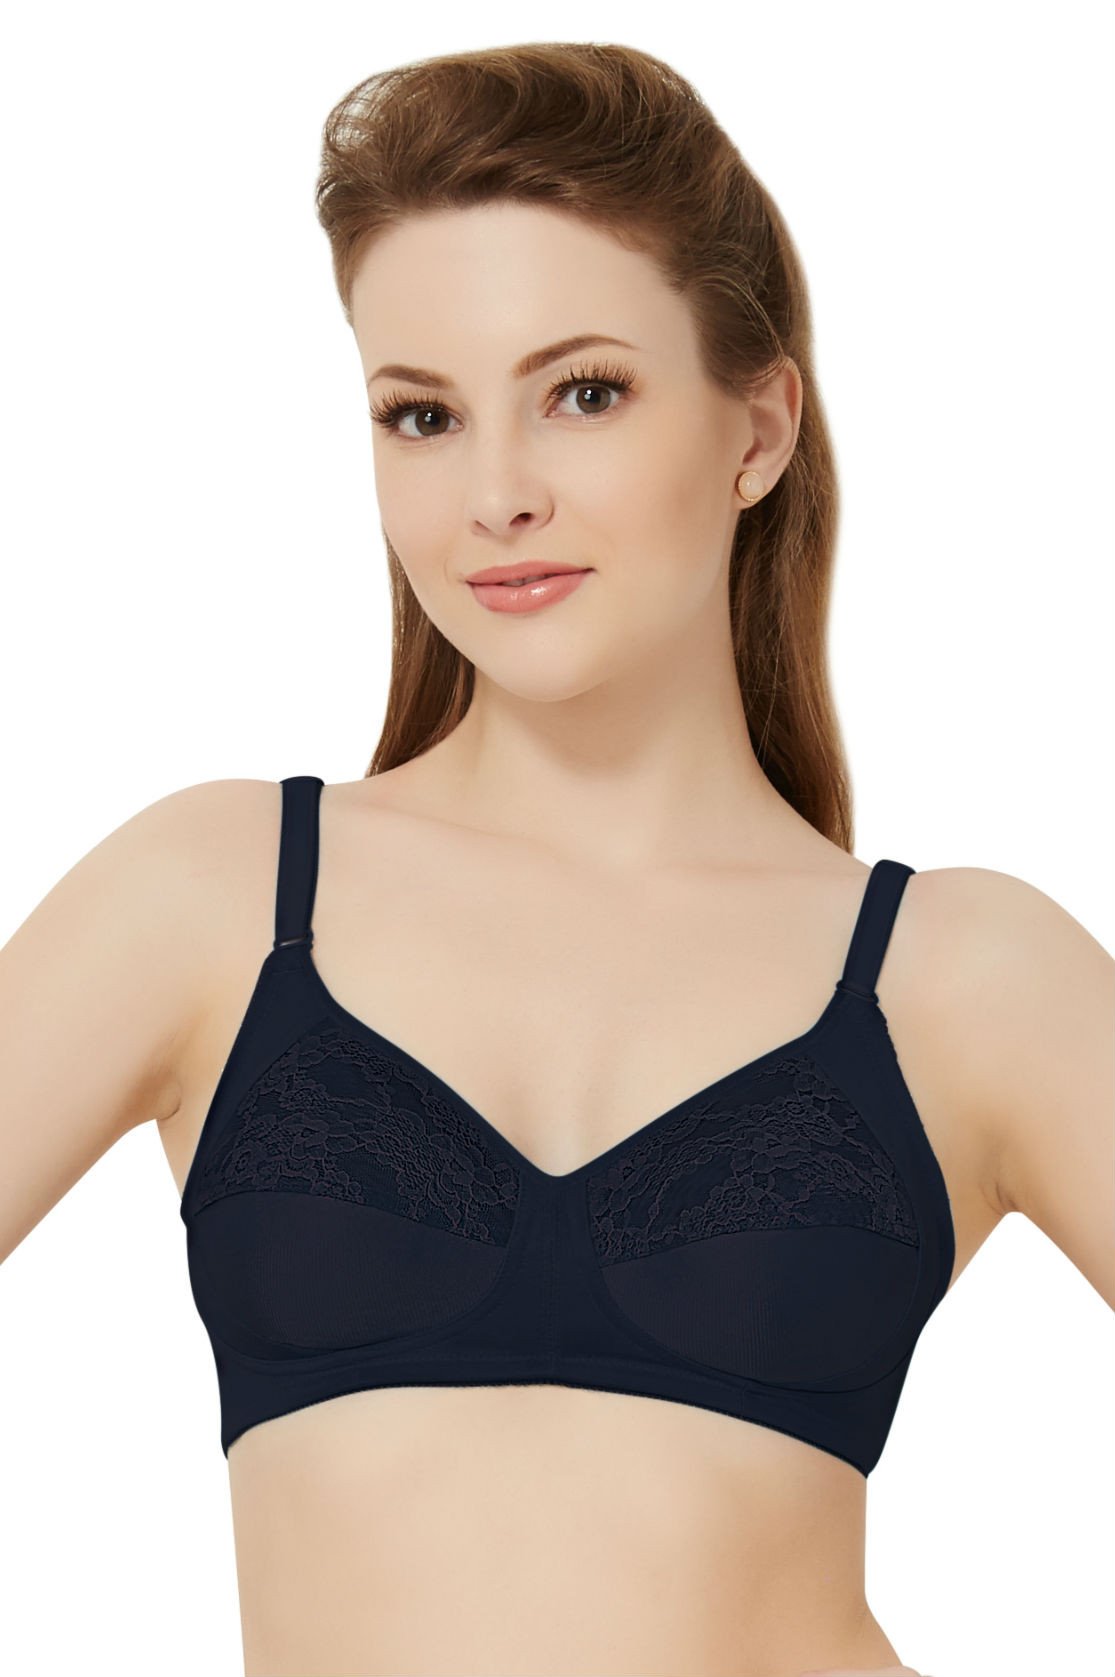 Buy Jockey Black Seamless Shaping Shorts Shapewear Online For women At Best  Price In India - Plus size Jockey Shapwear At Lowest Price